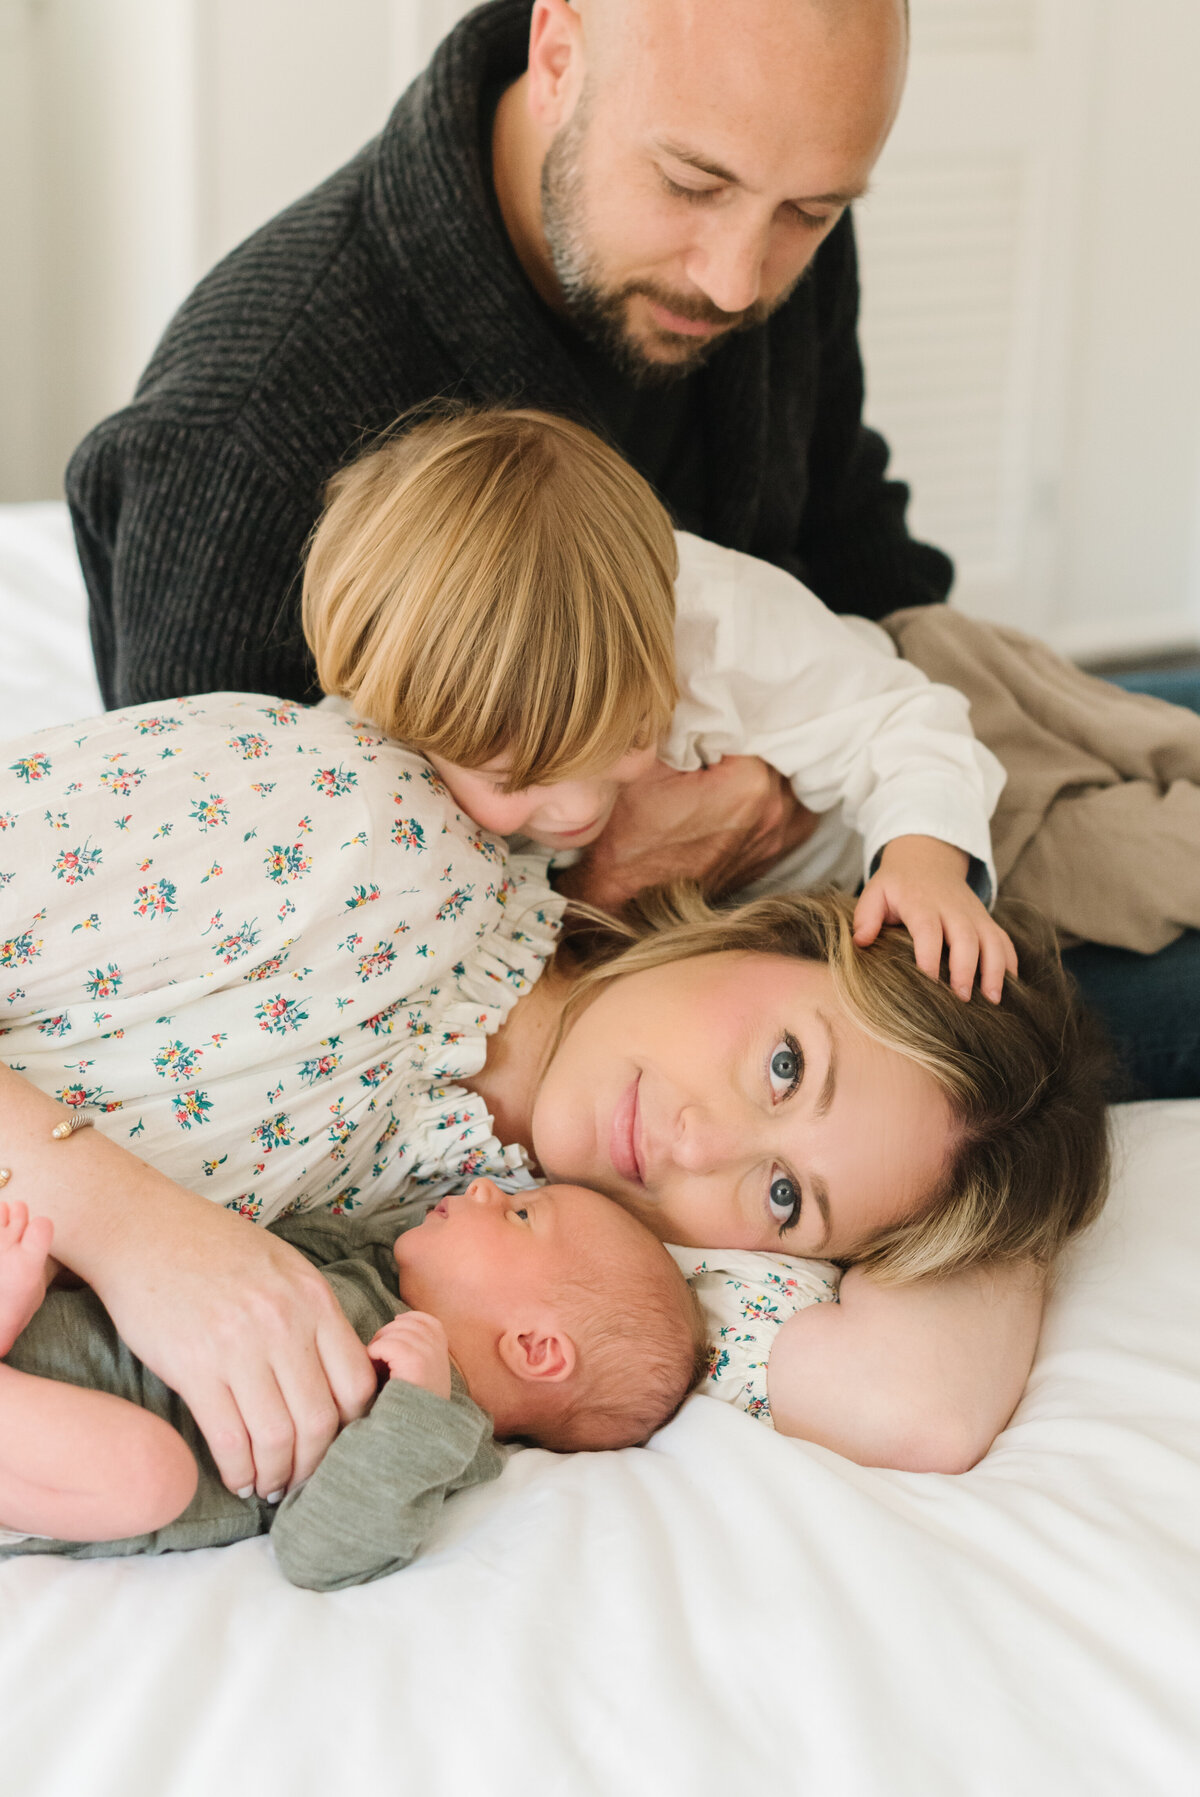 Mom looking at camera while newborn, toddler, and dad look at her - Washington DC Newborn Photographer